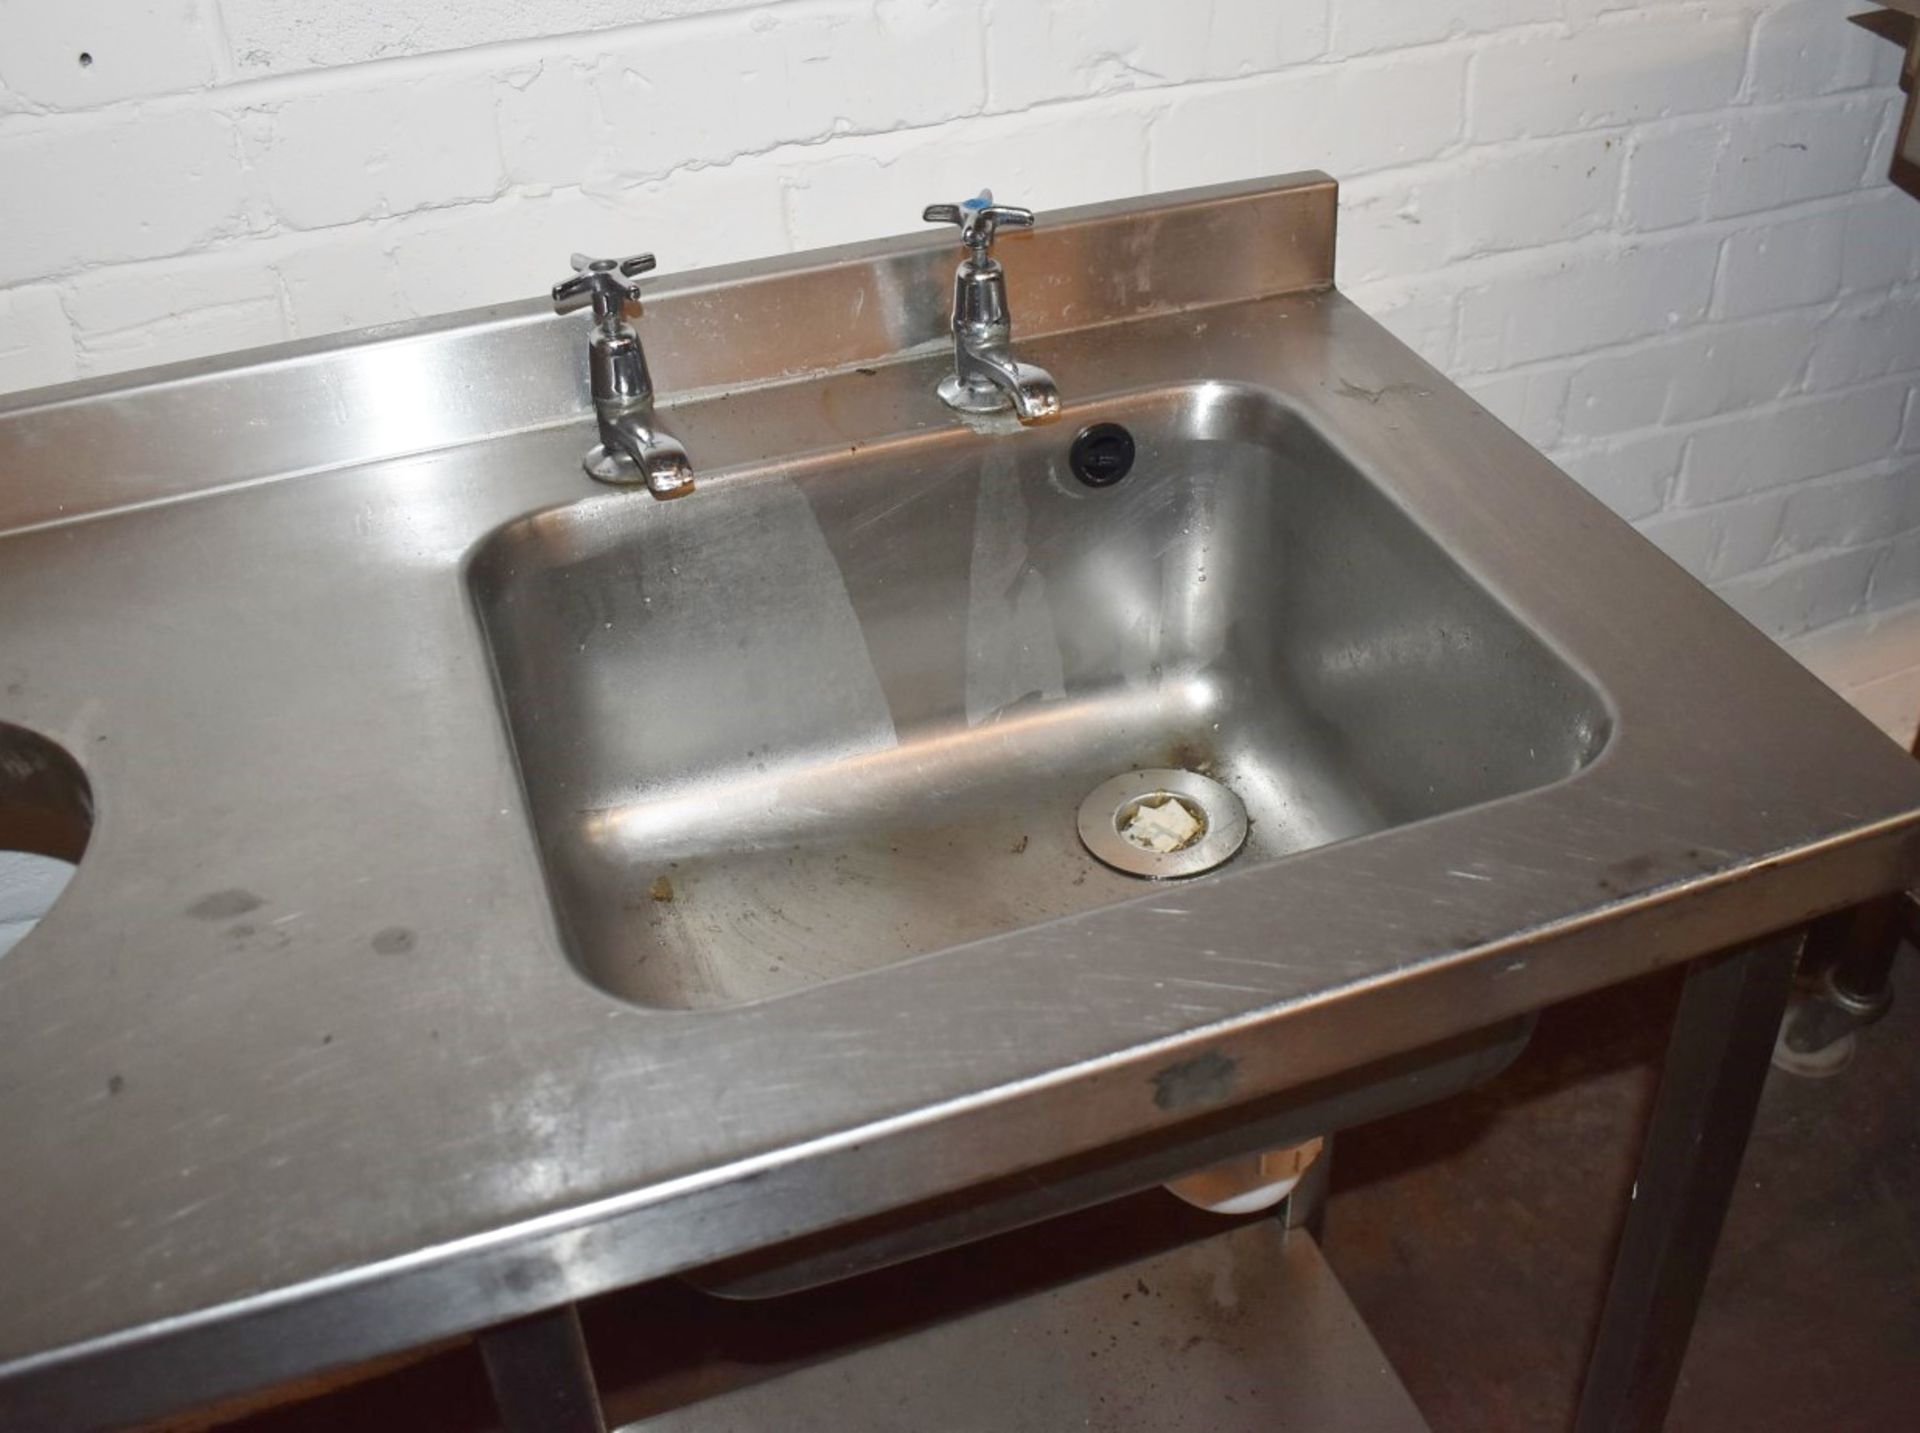 1 x Stainless Steel Sink Unt Featuring Single Wash Bowl, Taps, Prep Area and Central Waste Bin Chute - Image 8 of 8